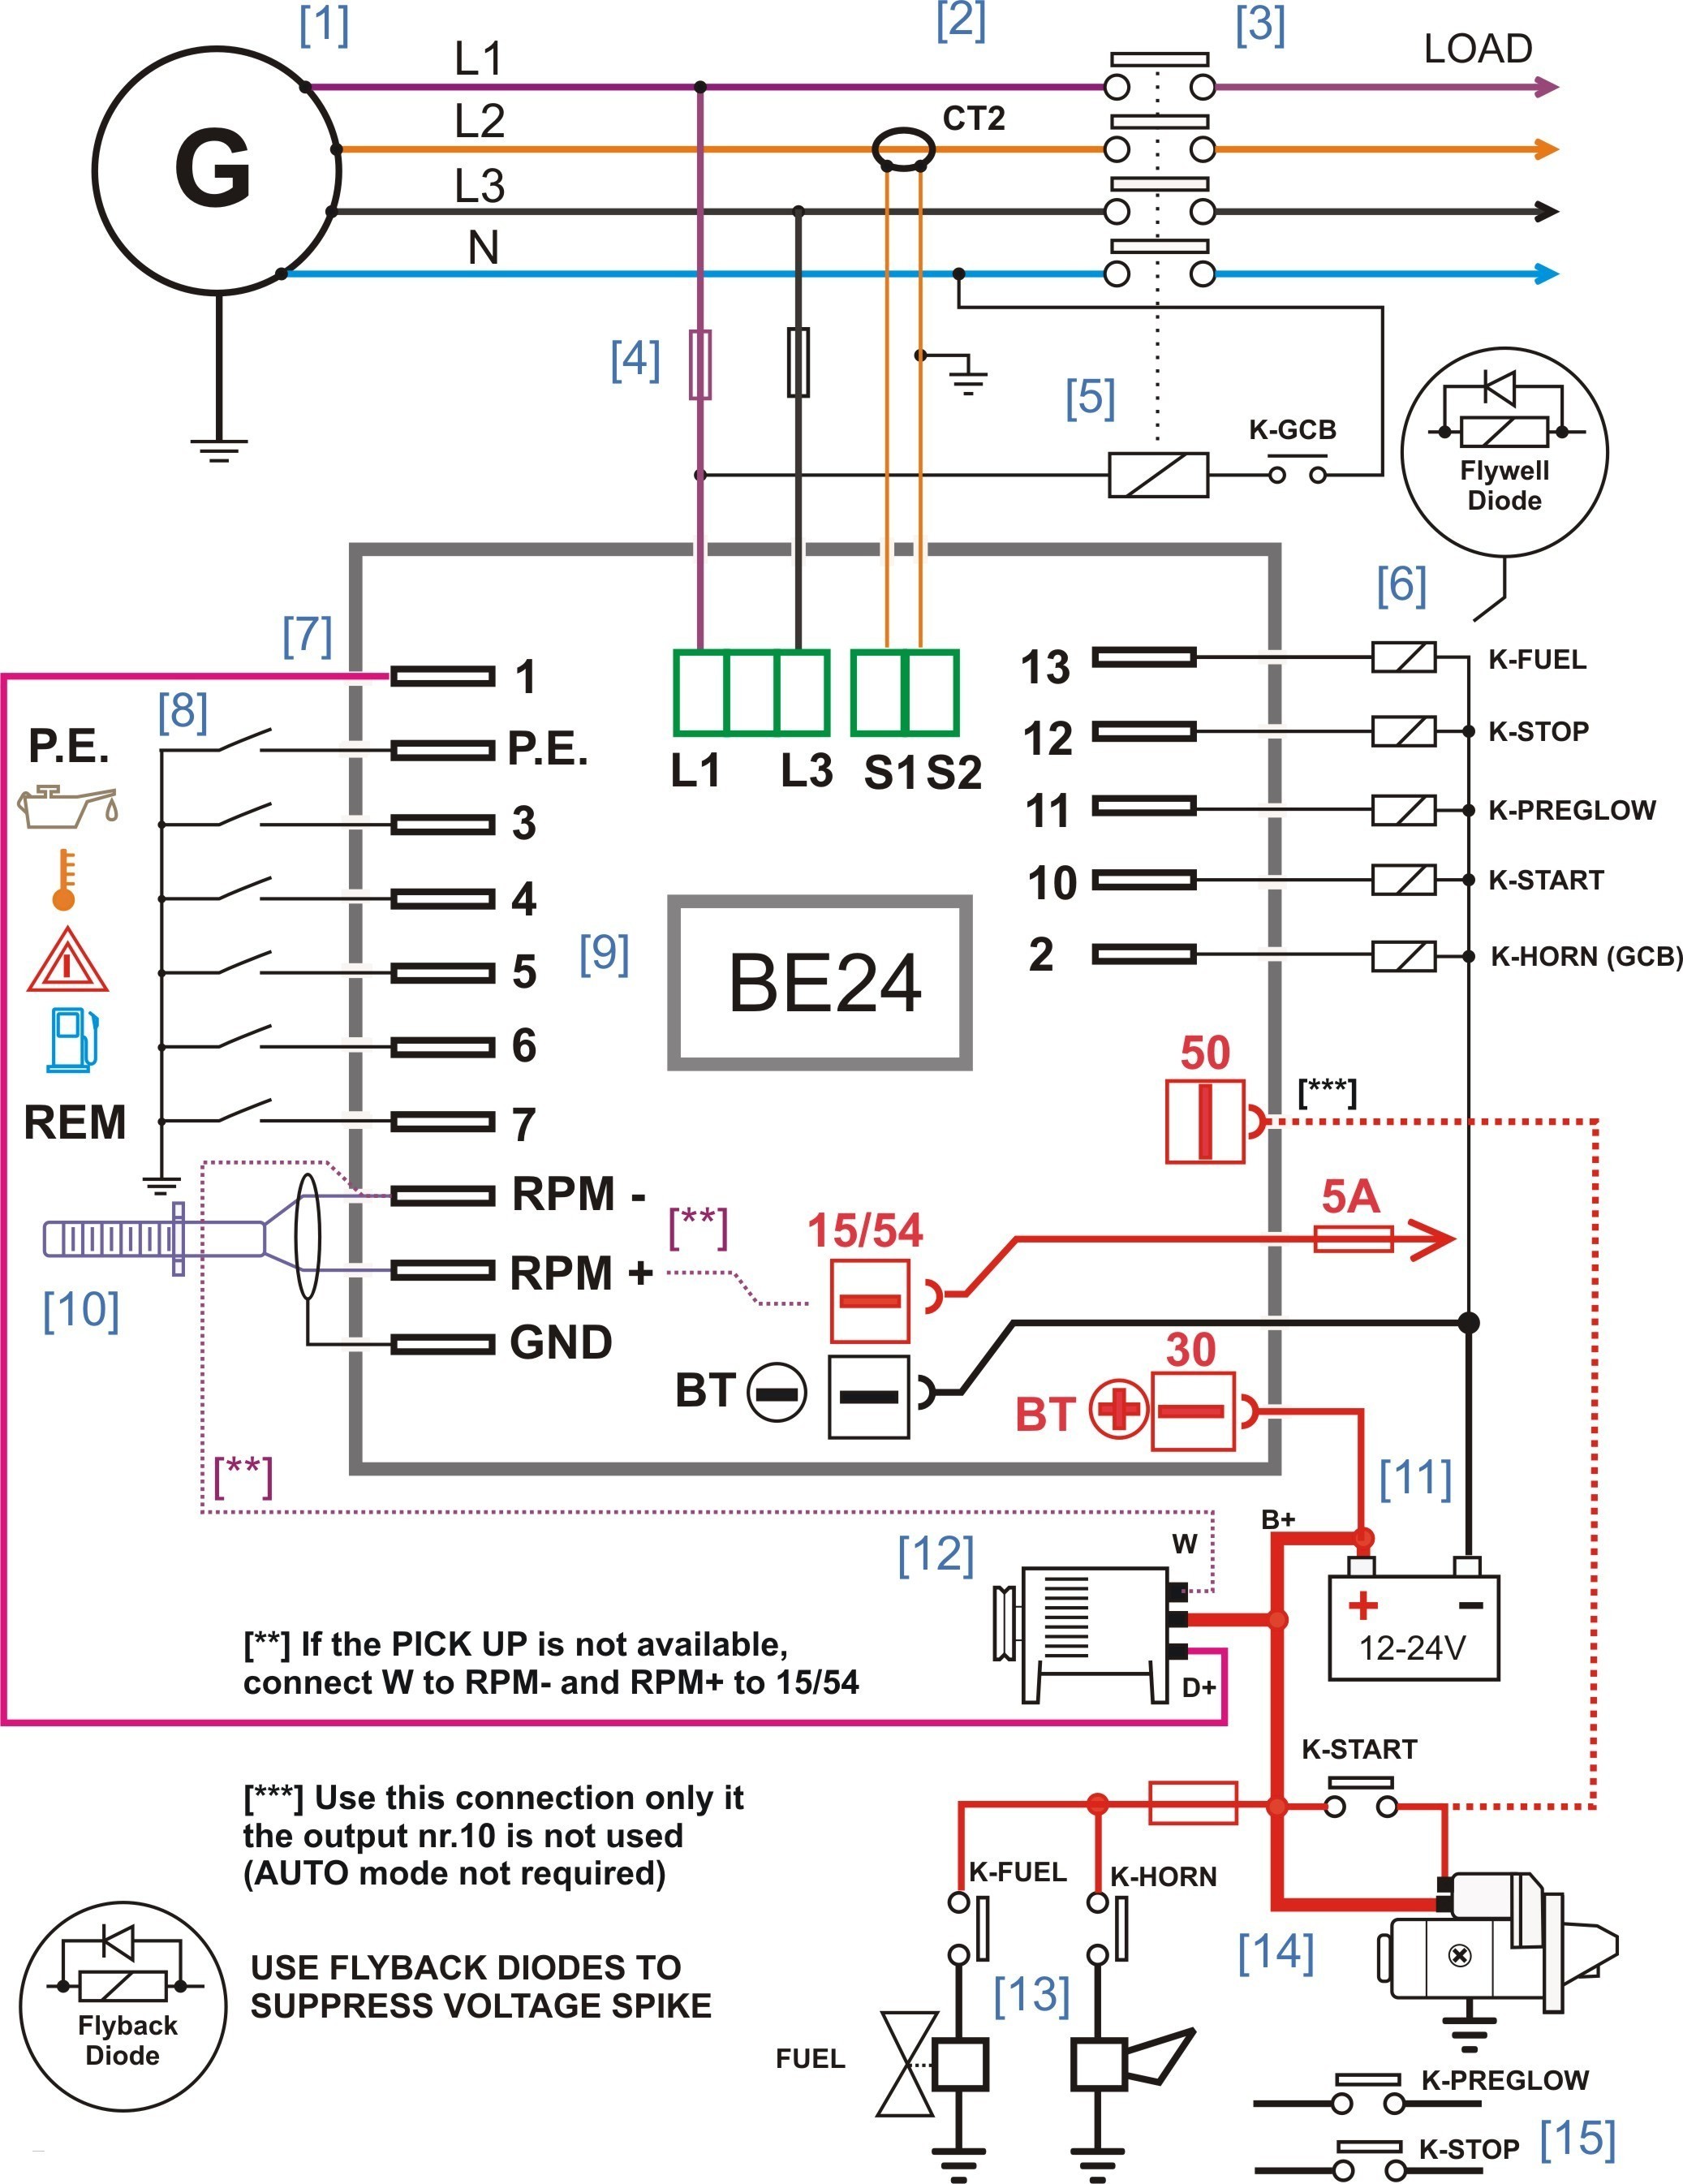 Generator Amf Wiring Diagram Valid Generator Wiring Diagram and Electrical Schematics Free Download